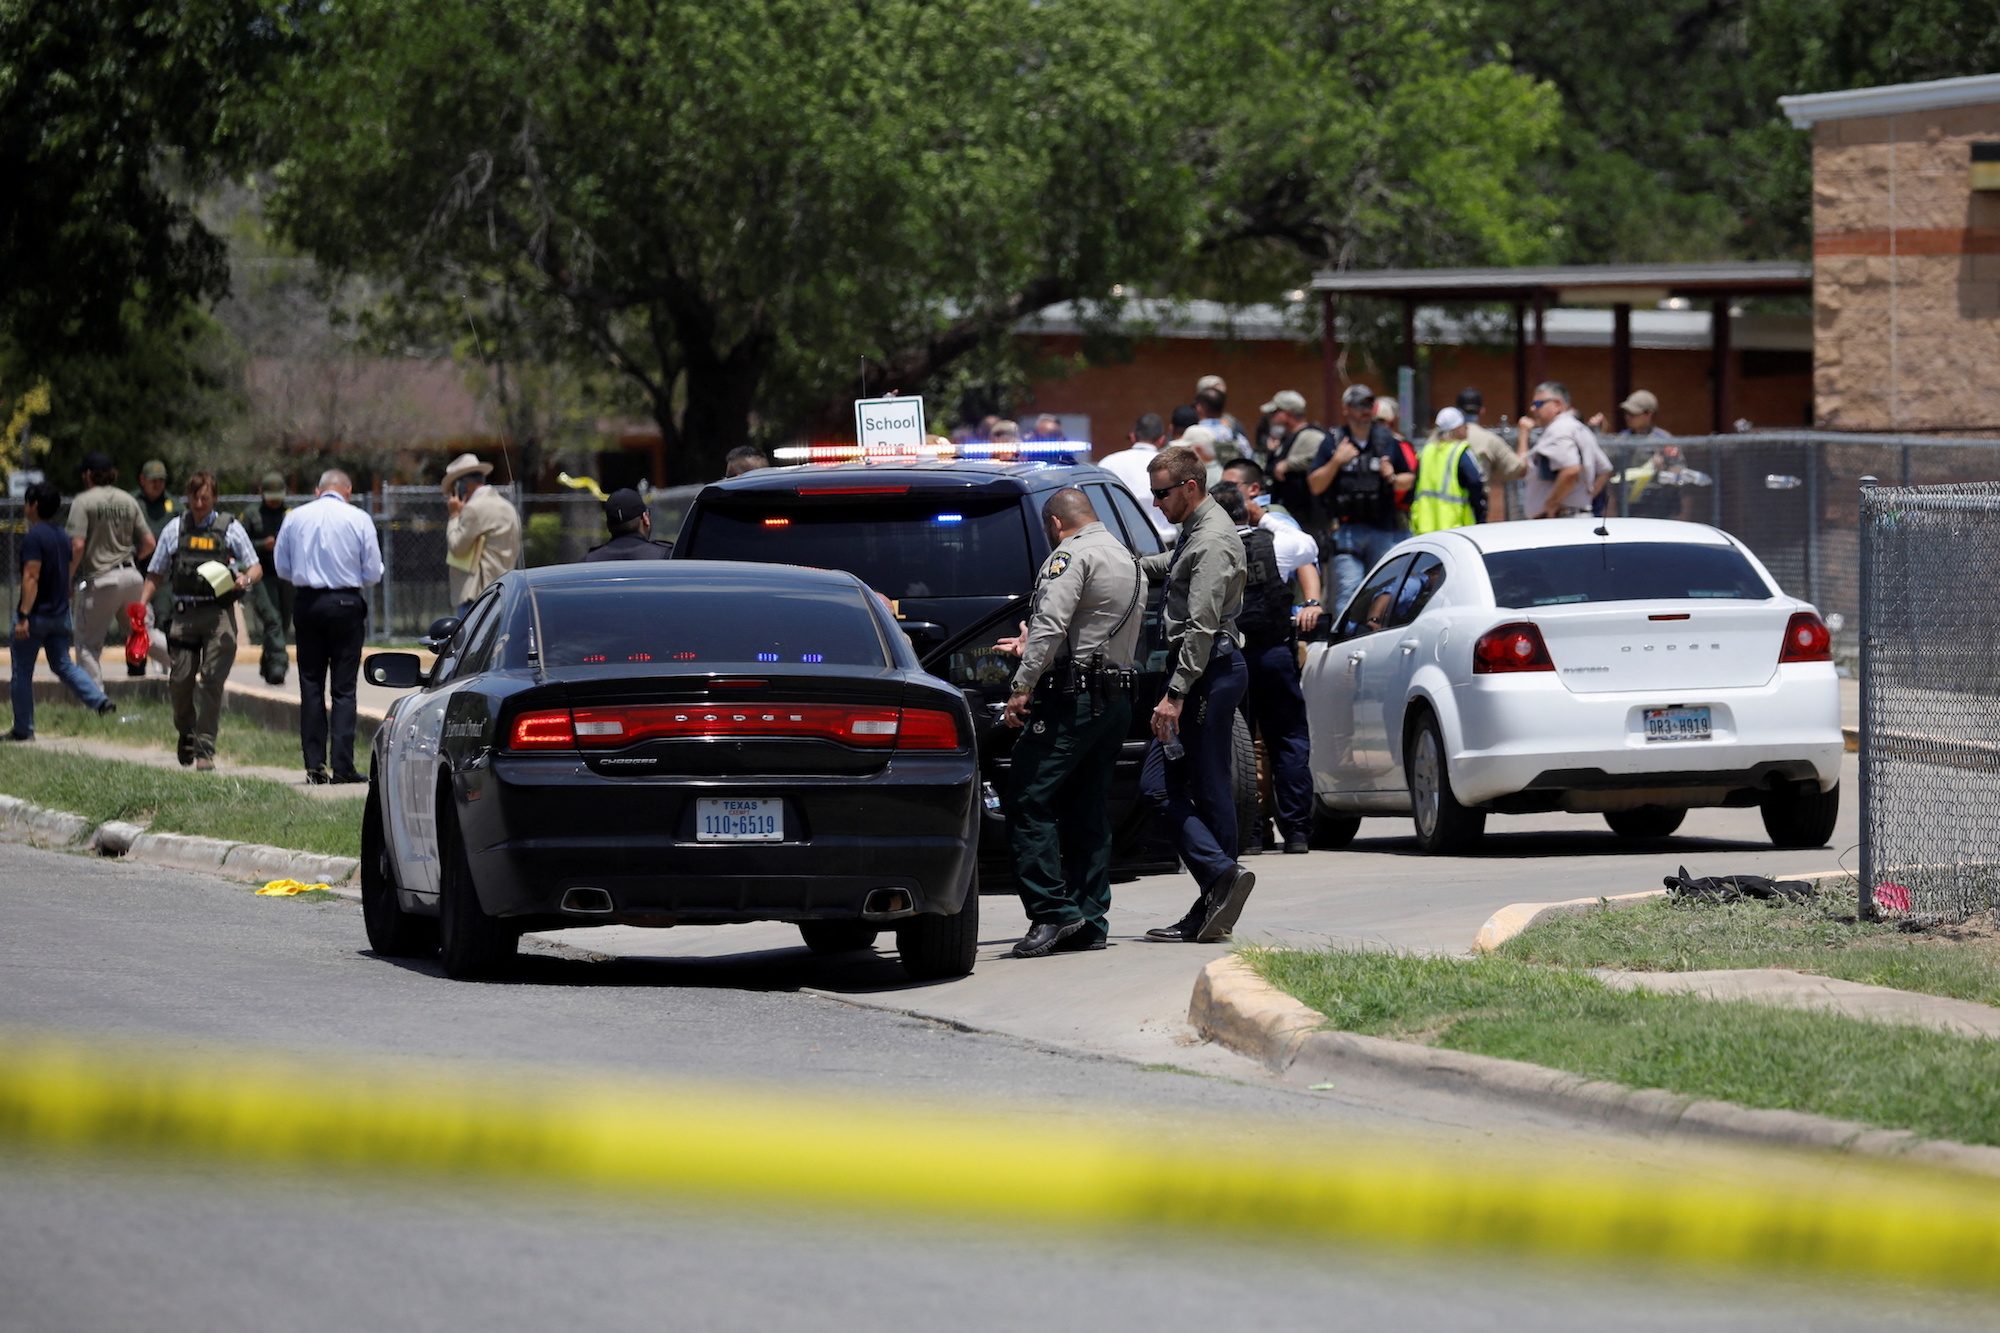 Police face questions over their response to Texas school massacre